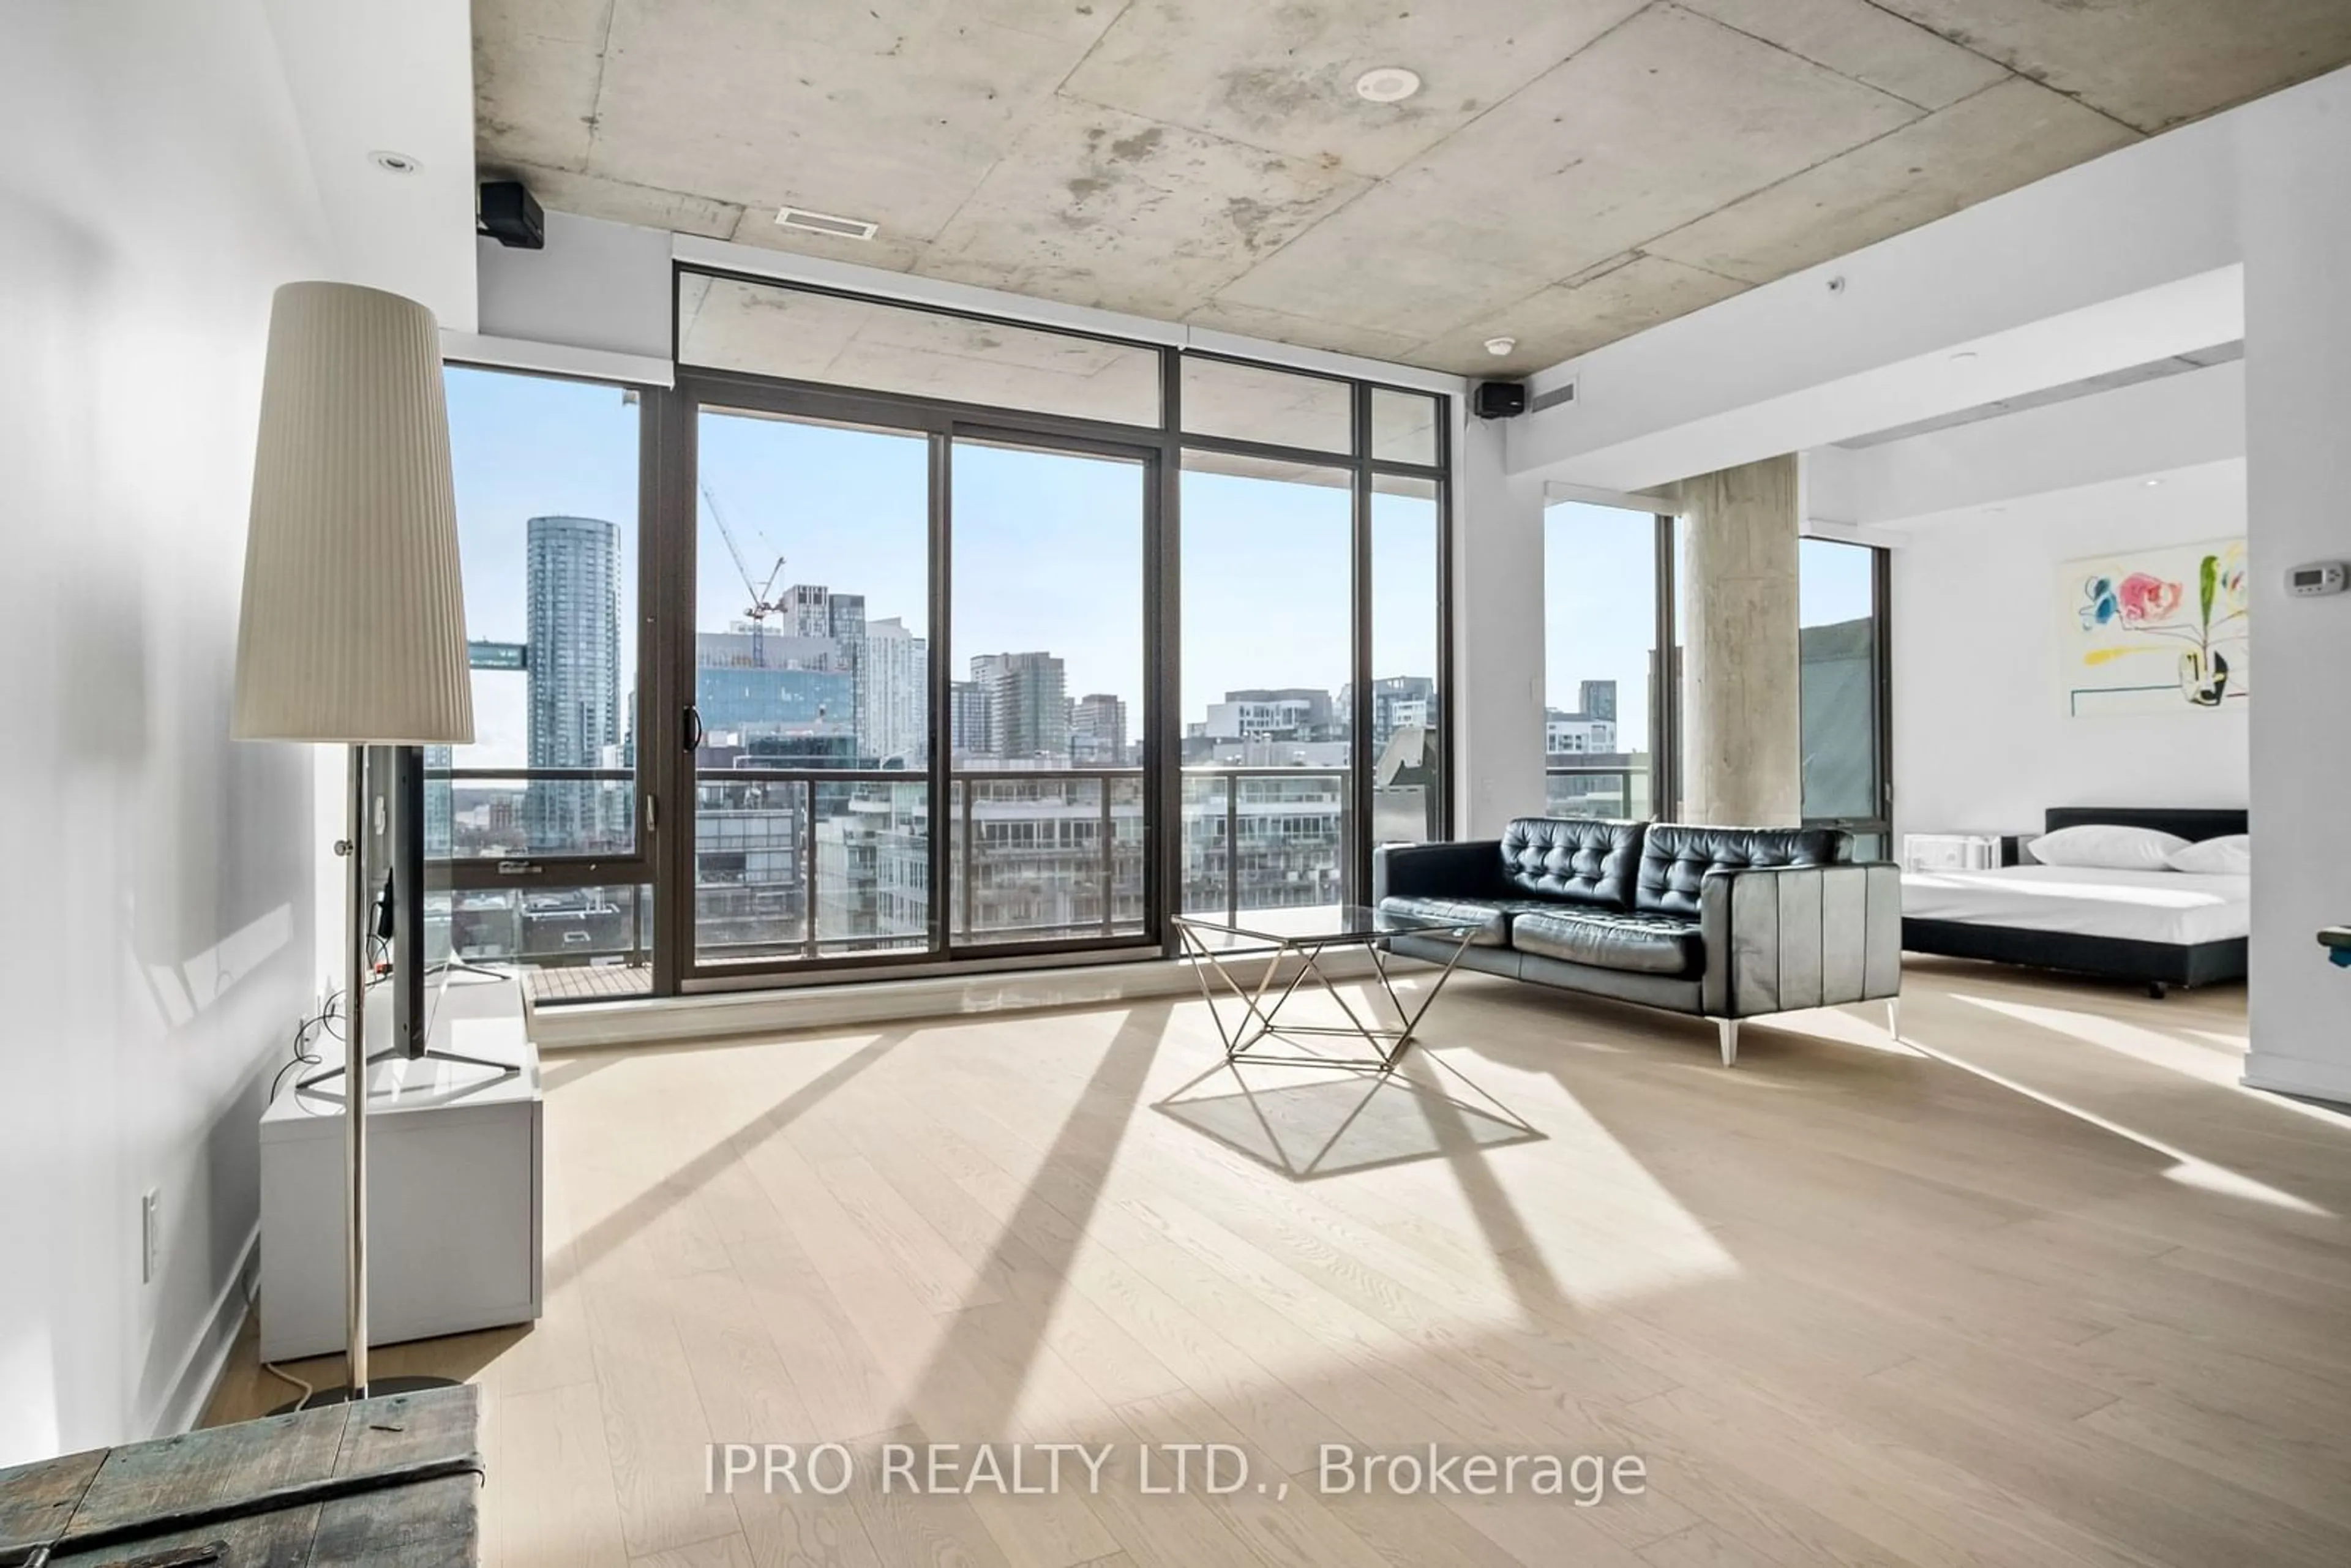 Other indoor space for 560 King St #1014, Toronto Ontario M5V 0L6